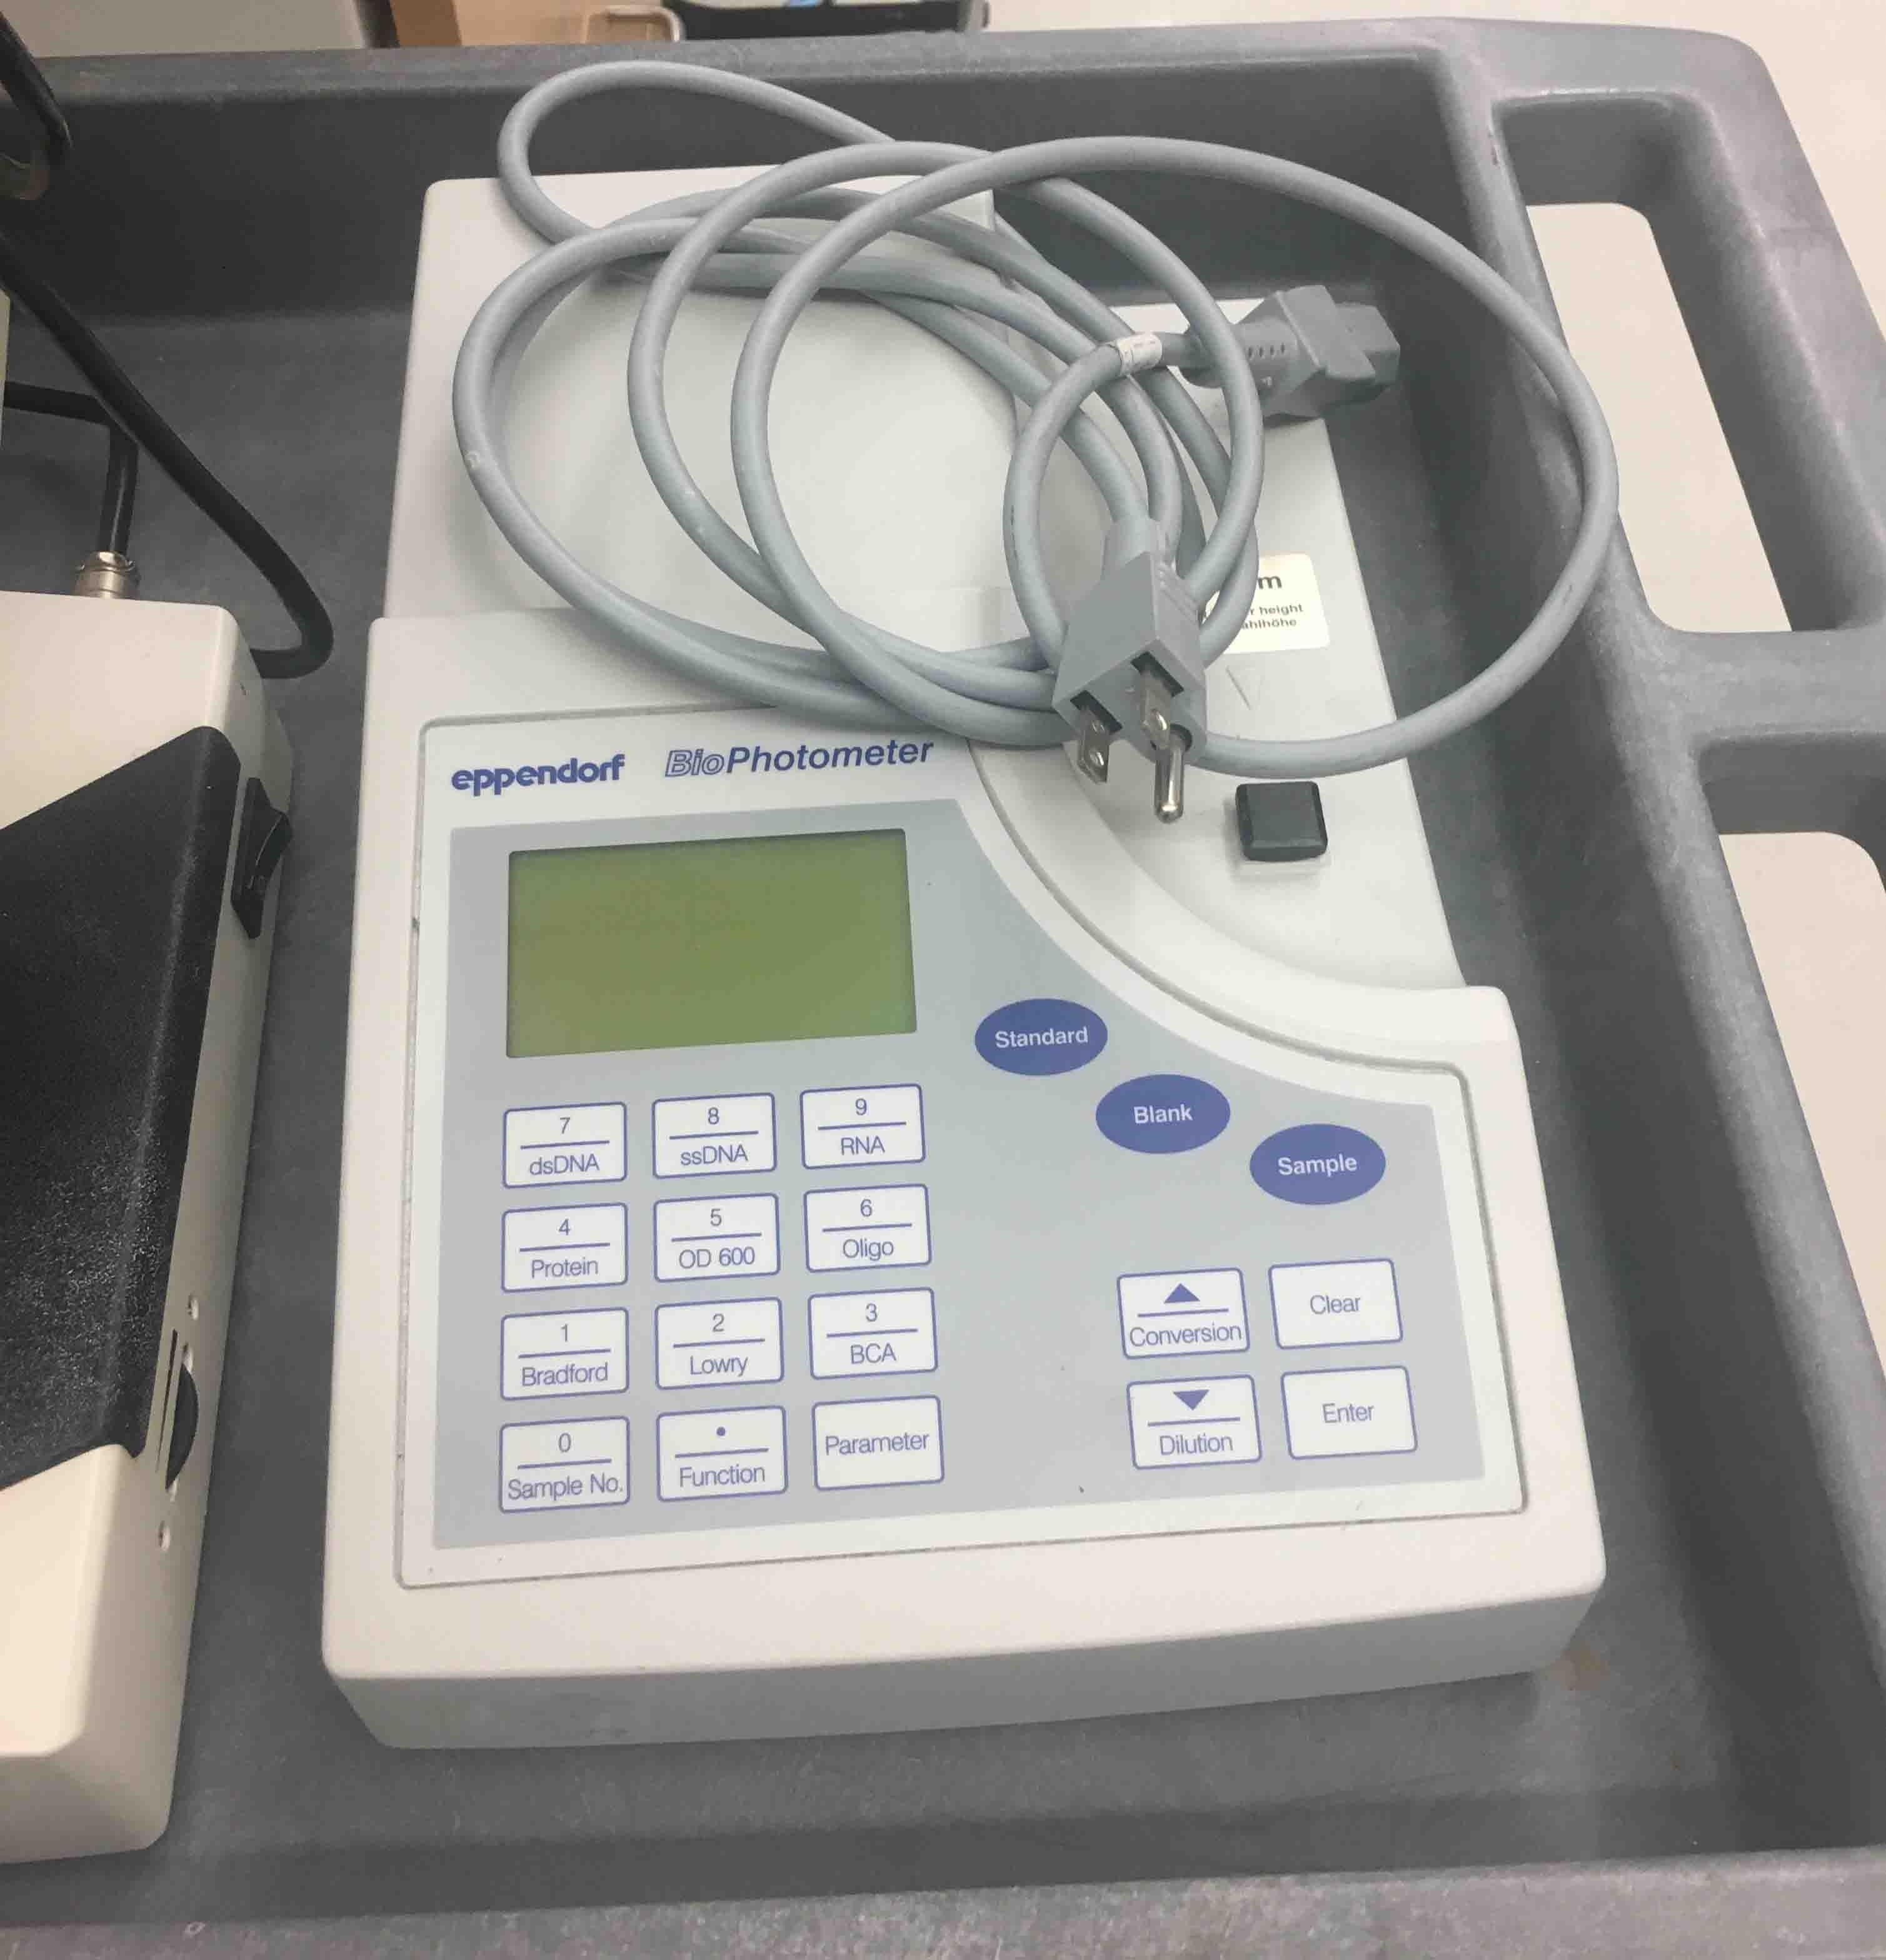 EPPENDORF BioPhotometer used for sale price #9194714 > buy from CAE